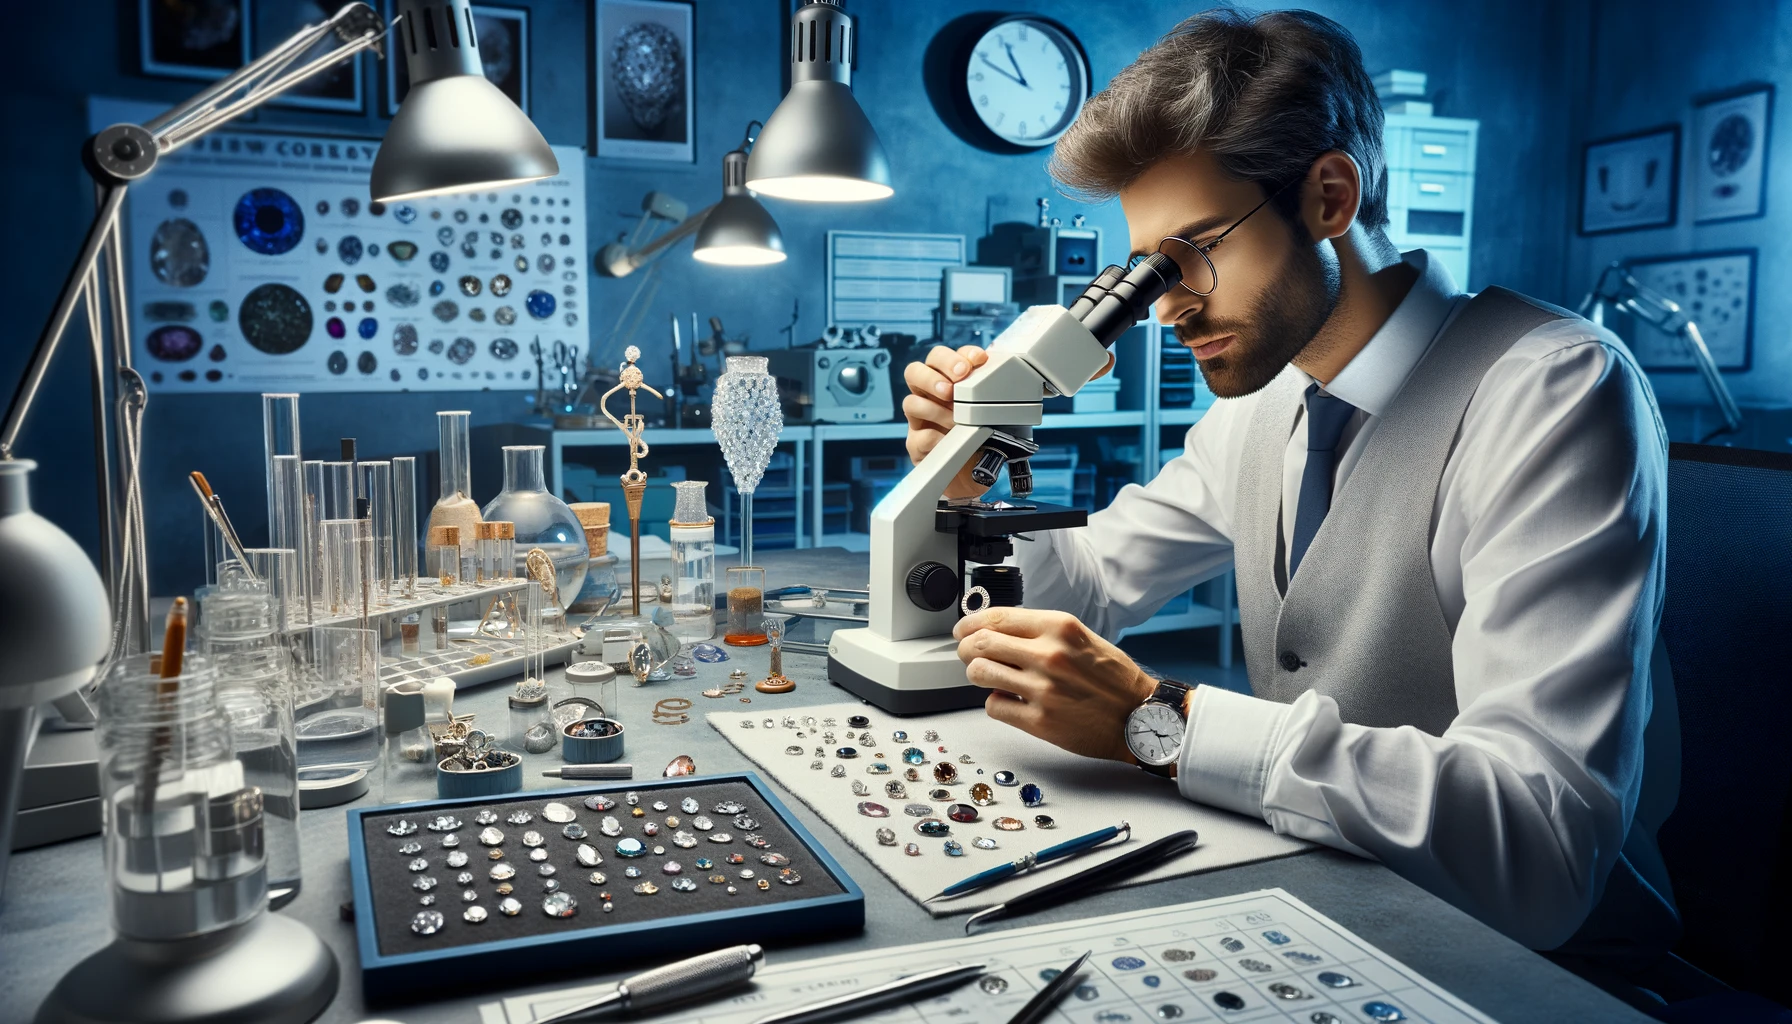 Gemologist examining a precious gemstone with a jeweler's loupe in a well-lit, organized gemology lab, surrounded by various tools and instruments.